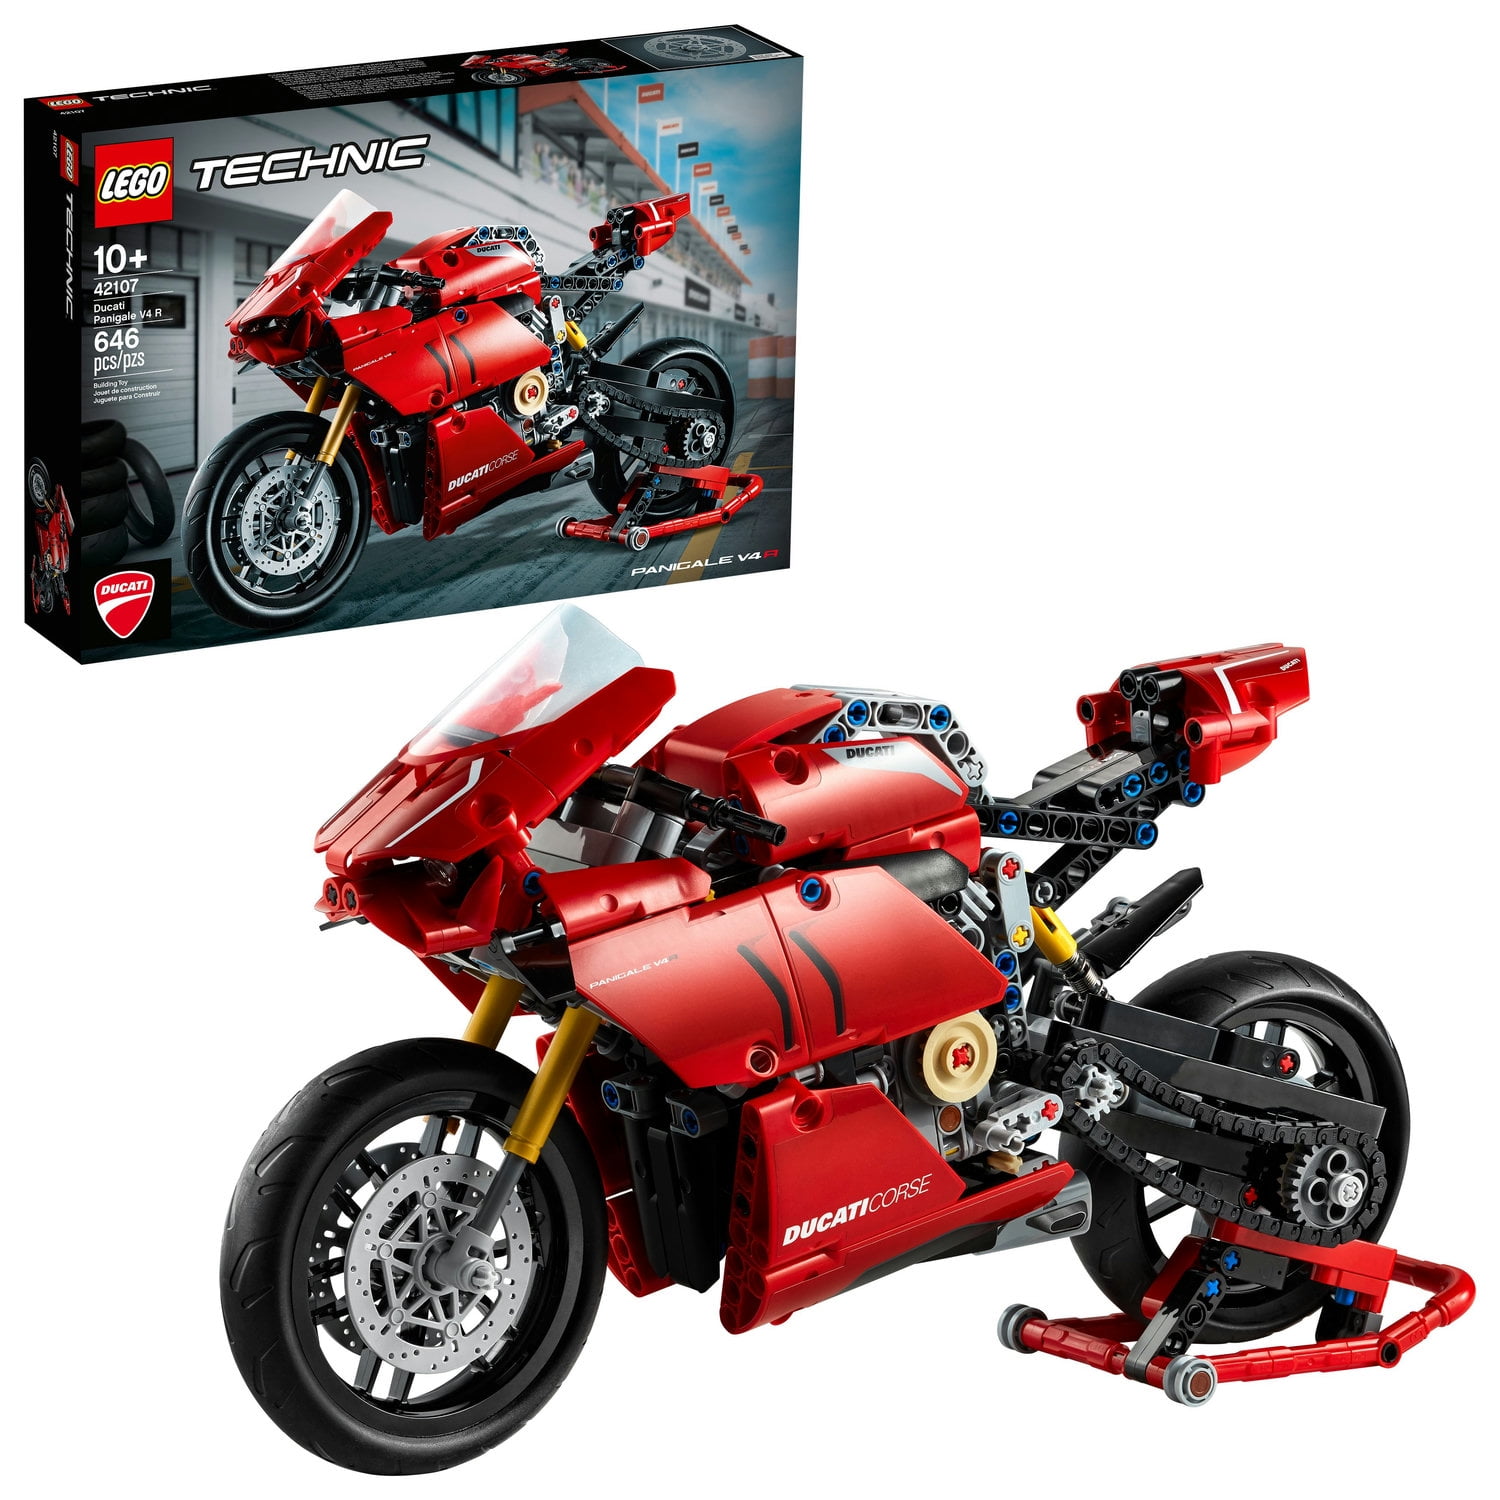 42107 LEGO Technic Ducati Panigale V4 R Motor Bike Motorcycle 646 Pieces Age 10+ 